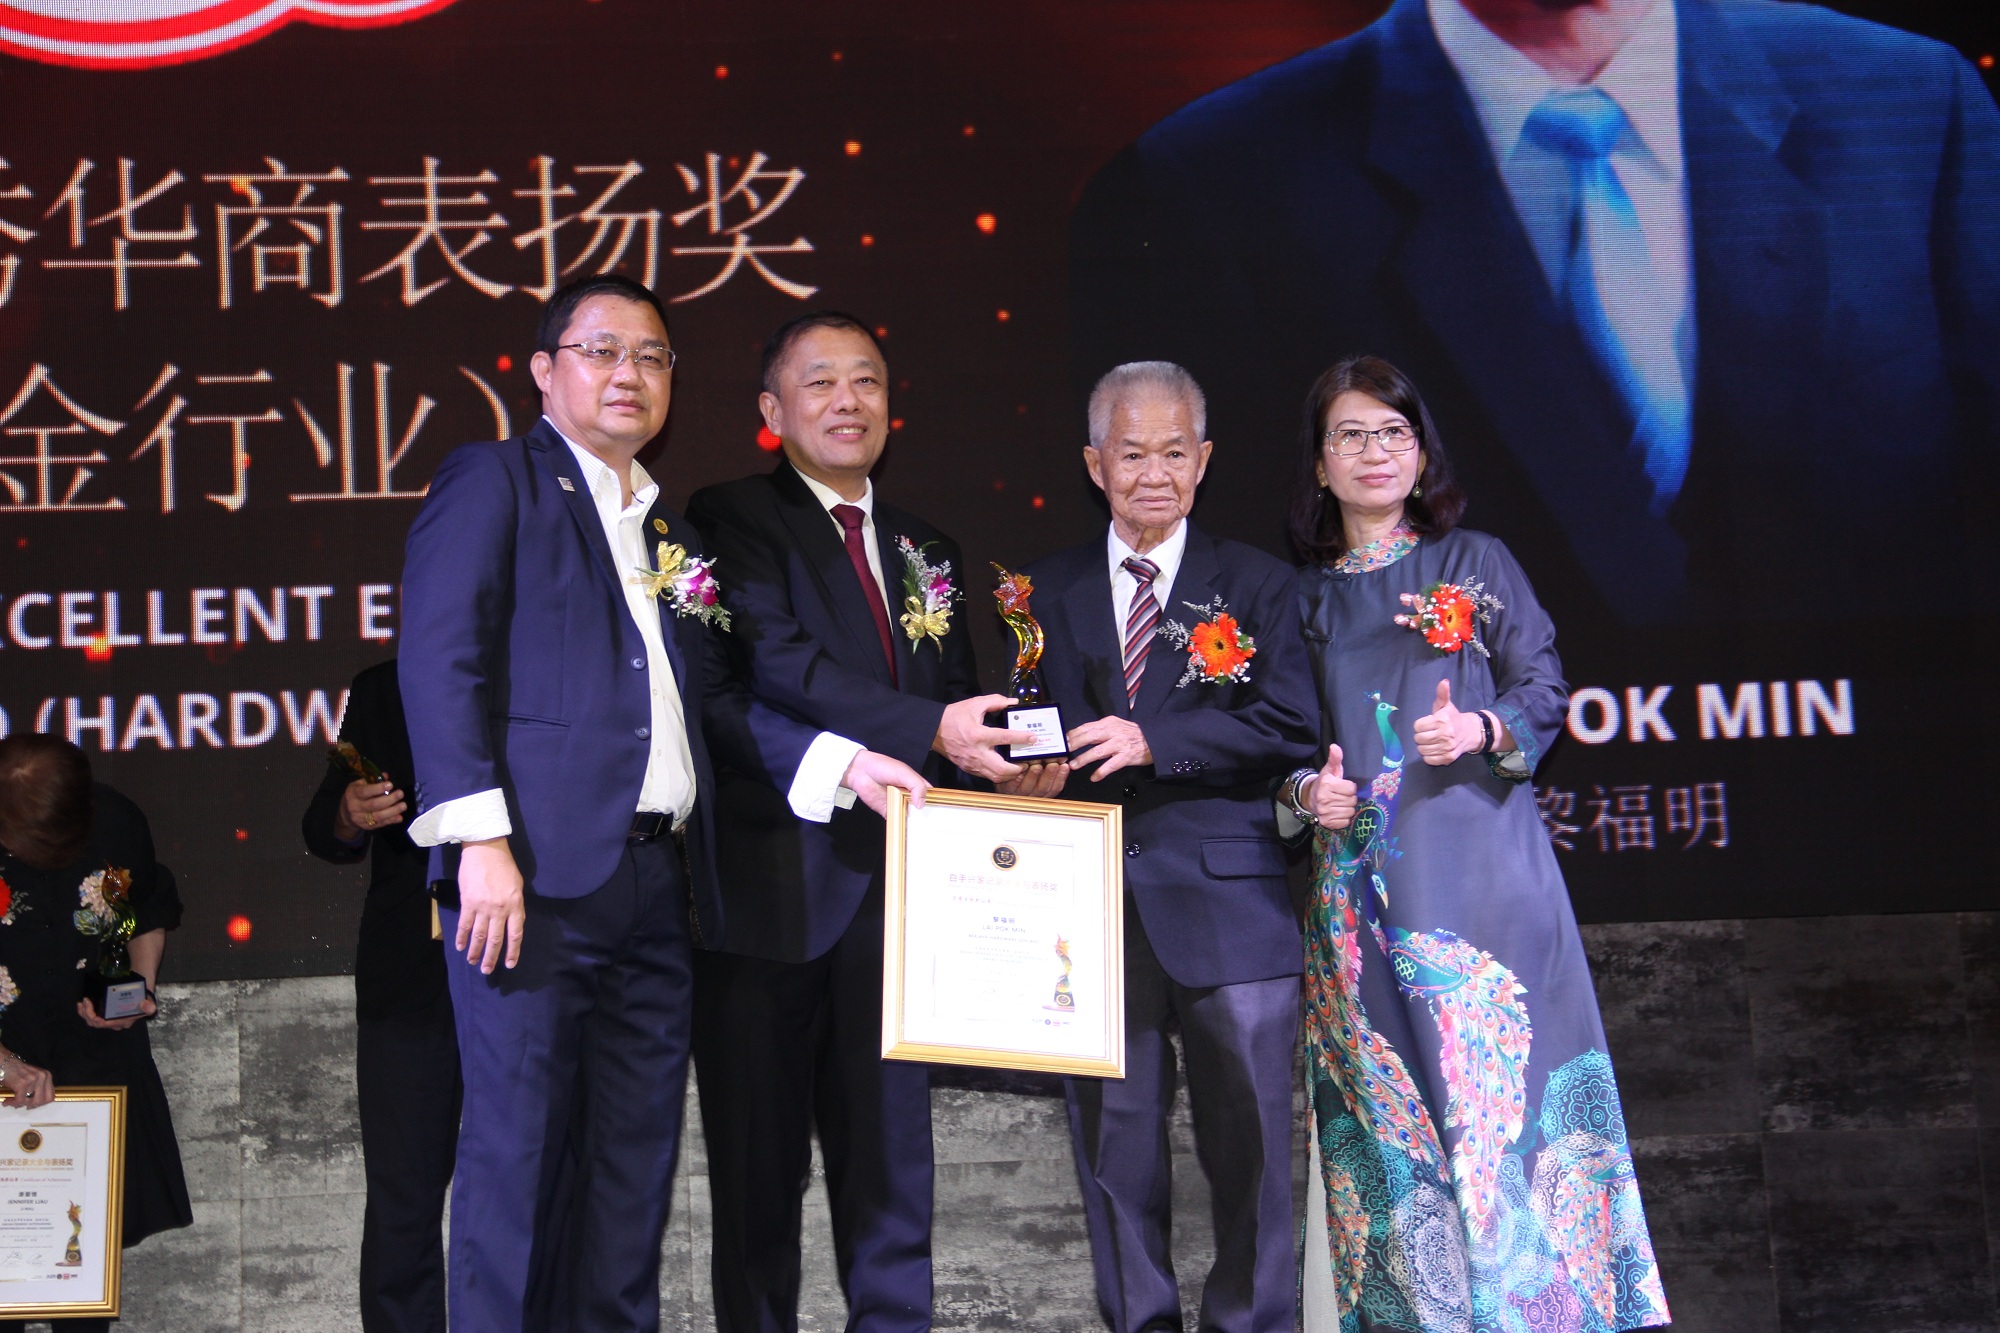 Lai Fuming won the ASEAN Excellent Chinese Entrepreneur Award (hardware industry).